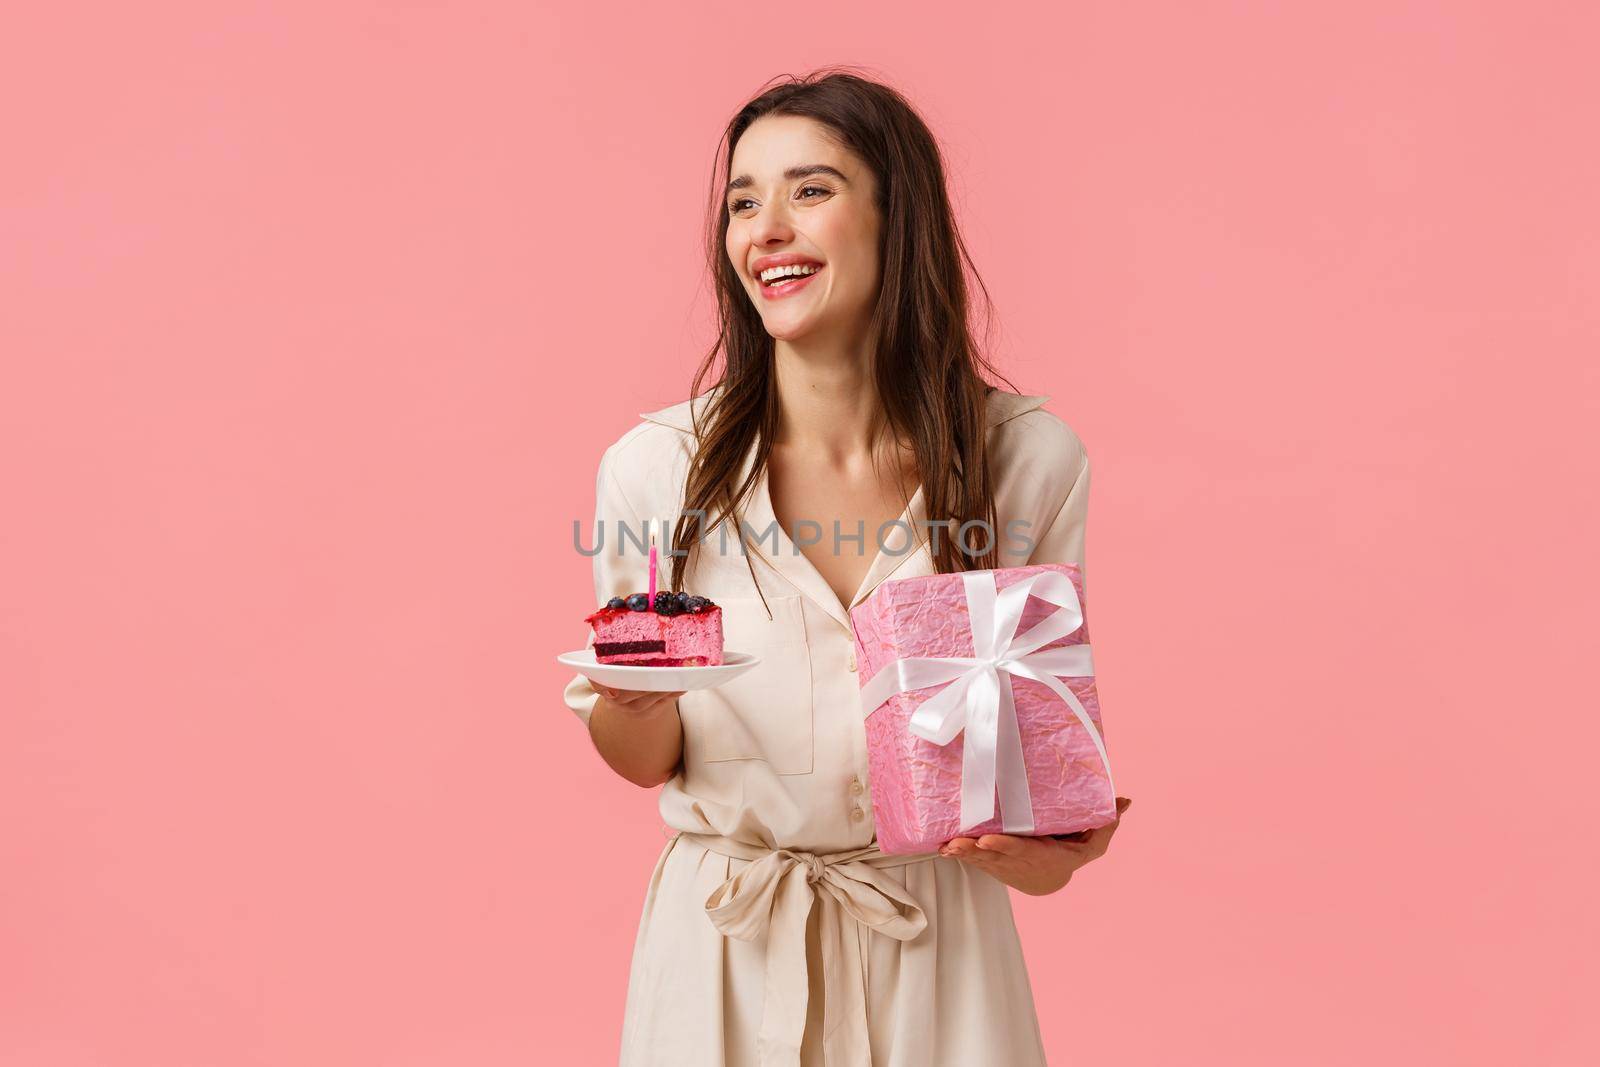 Celebration, party and happiness concept. Carefree smiling happy european woman having fun parying own b-day party, holding gift and piece cake, blow-out candle, pink background.